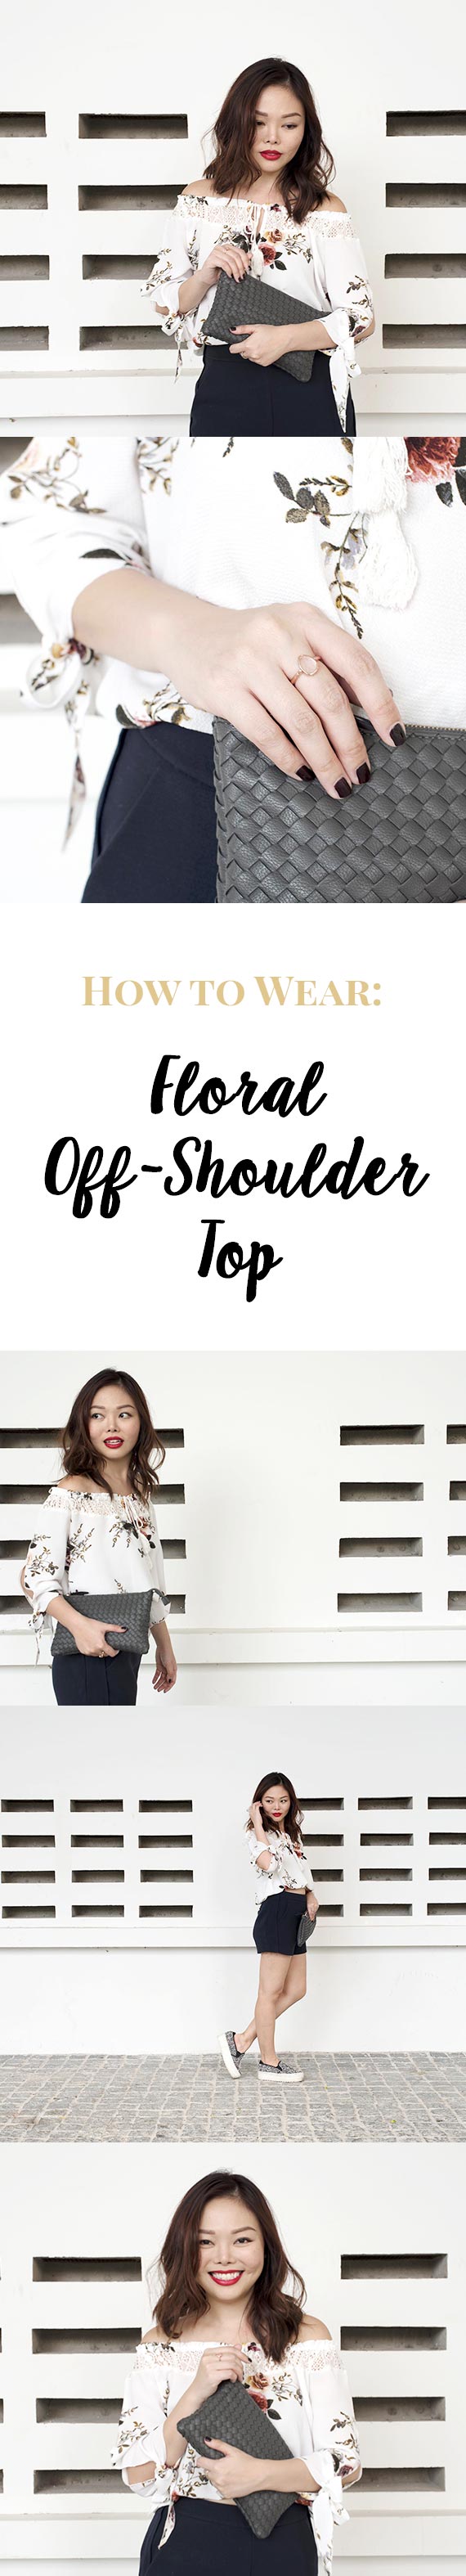 How to Wear: Floral Off-Shoulder Top by The Skinny Scout (Subscribe now!)